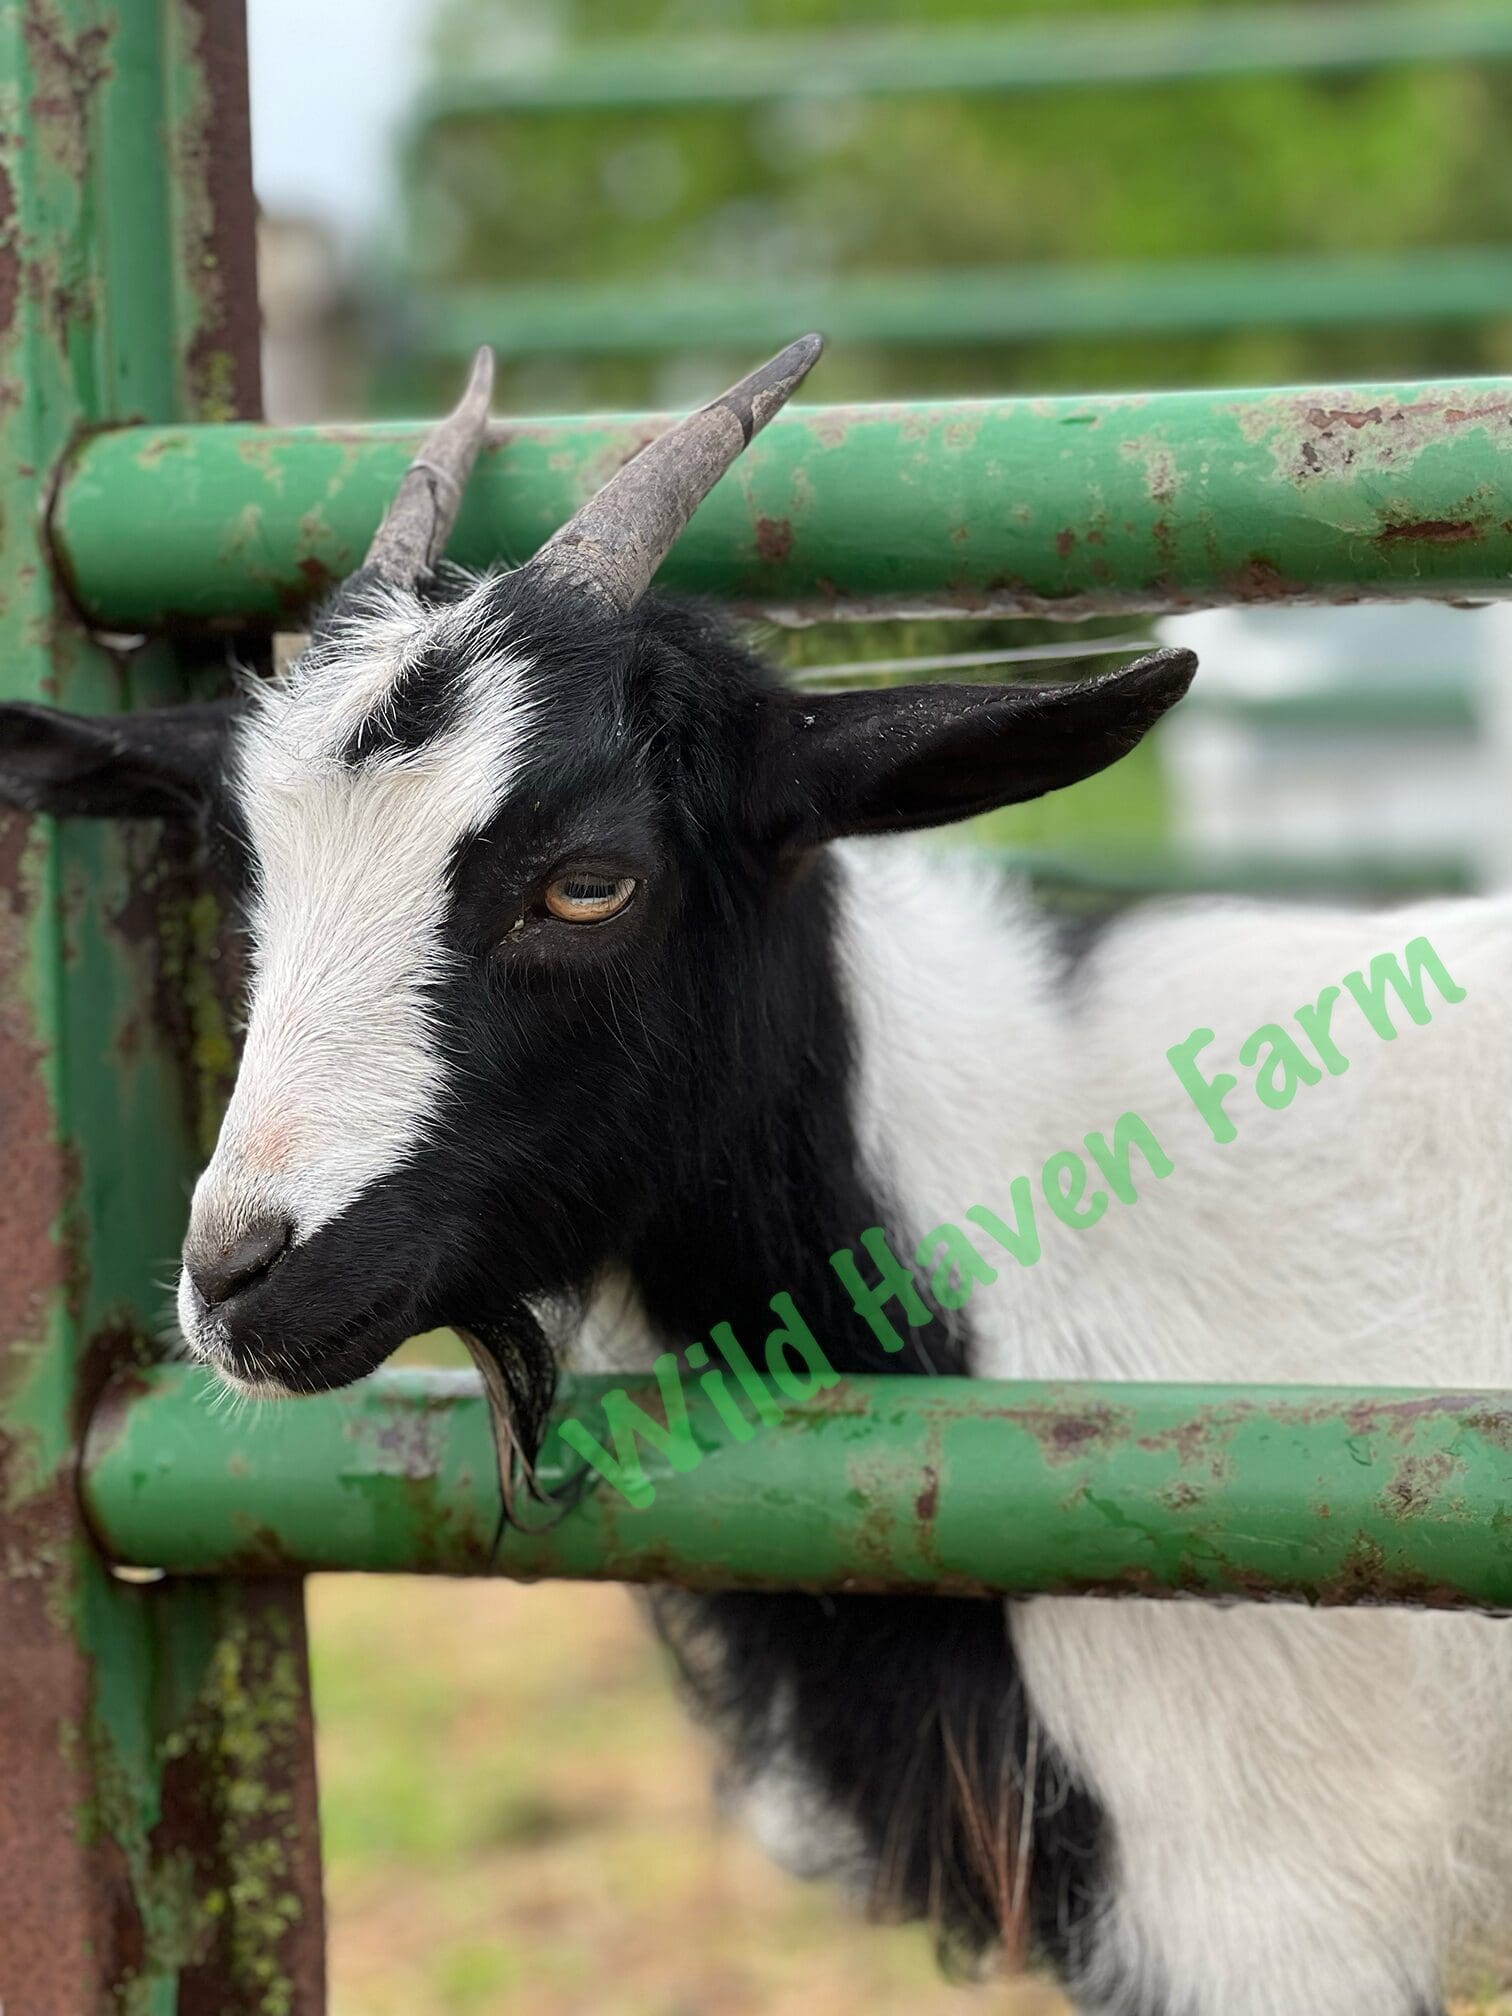 Goat with head through a metal fence